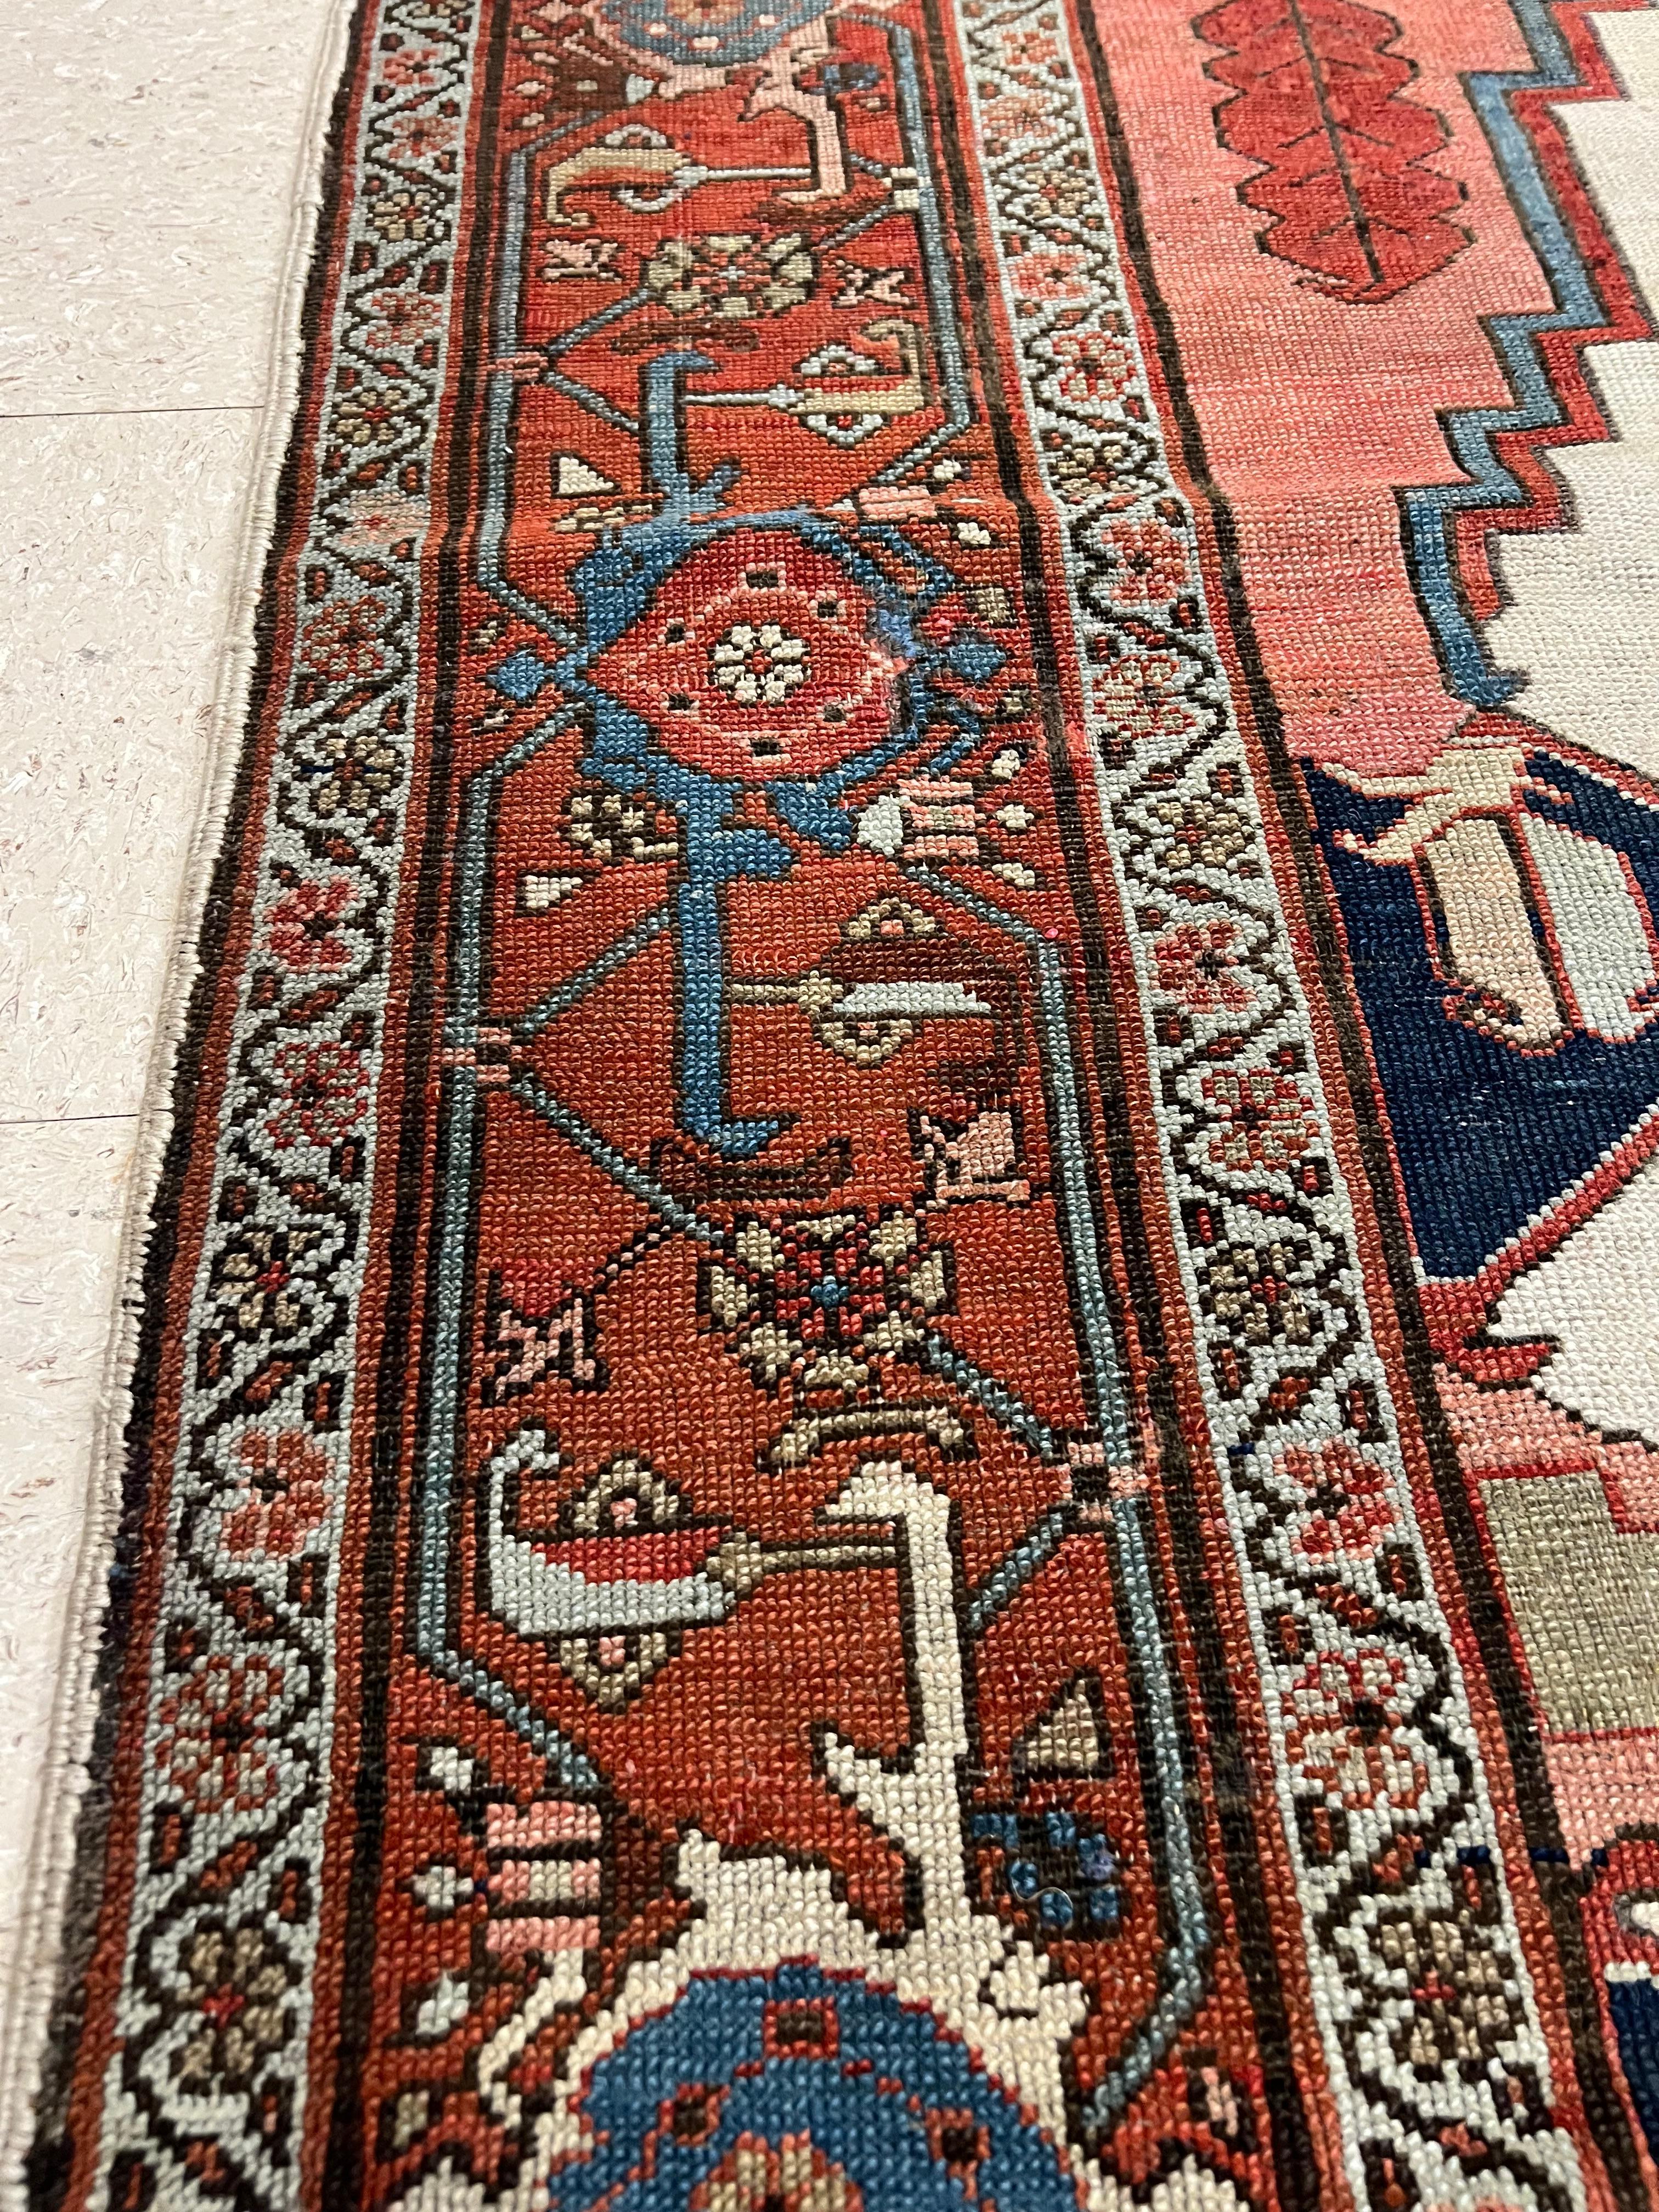 Antique Persian Serapi Carpet, Handmade, Oriental Rug, Rust, Ivory, Light Blue In Good Condition For Sale In Port Washington, NY